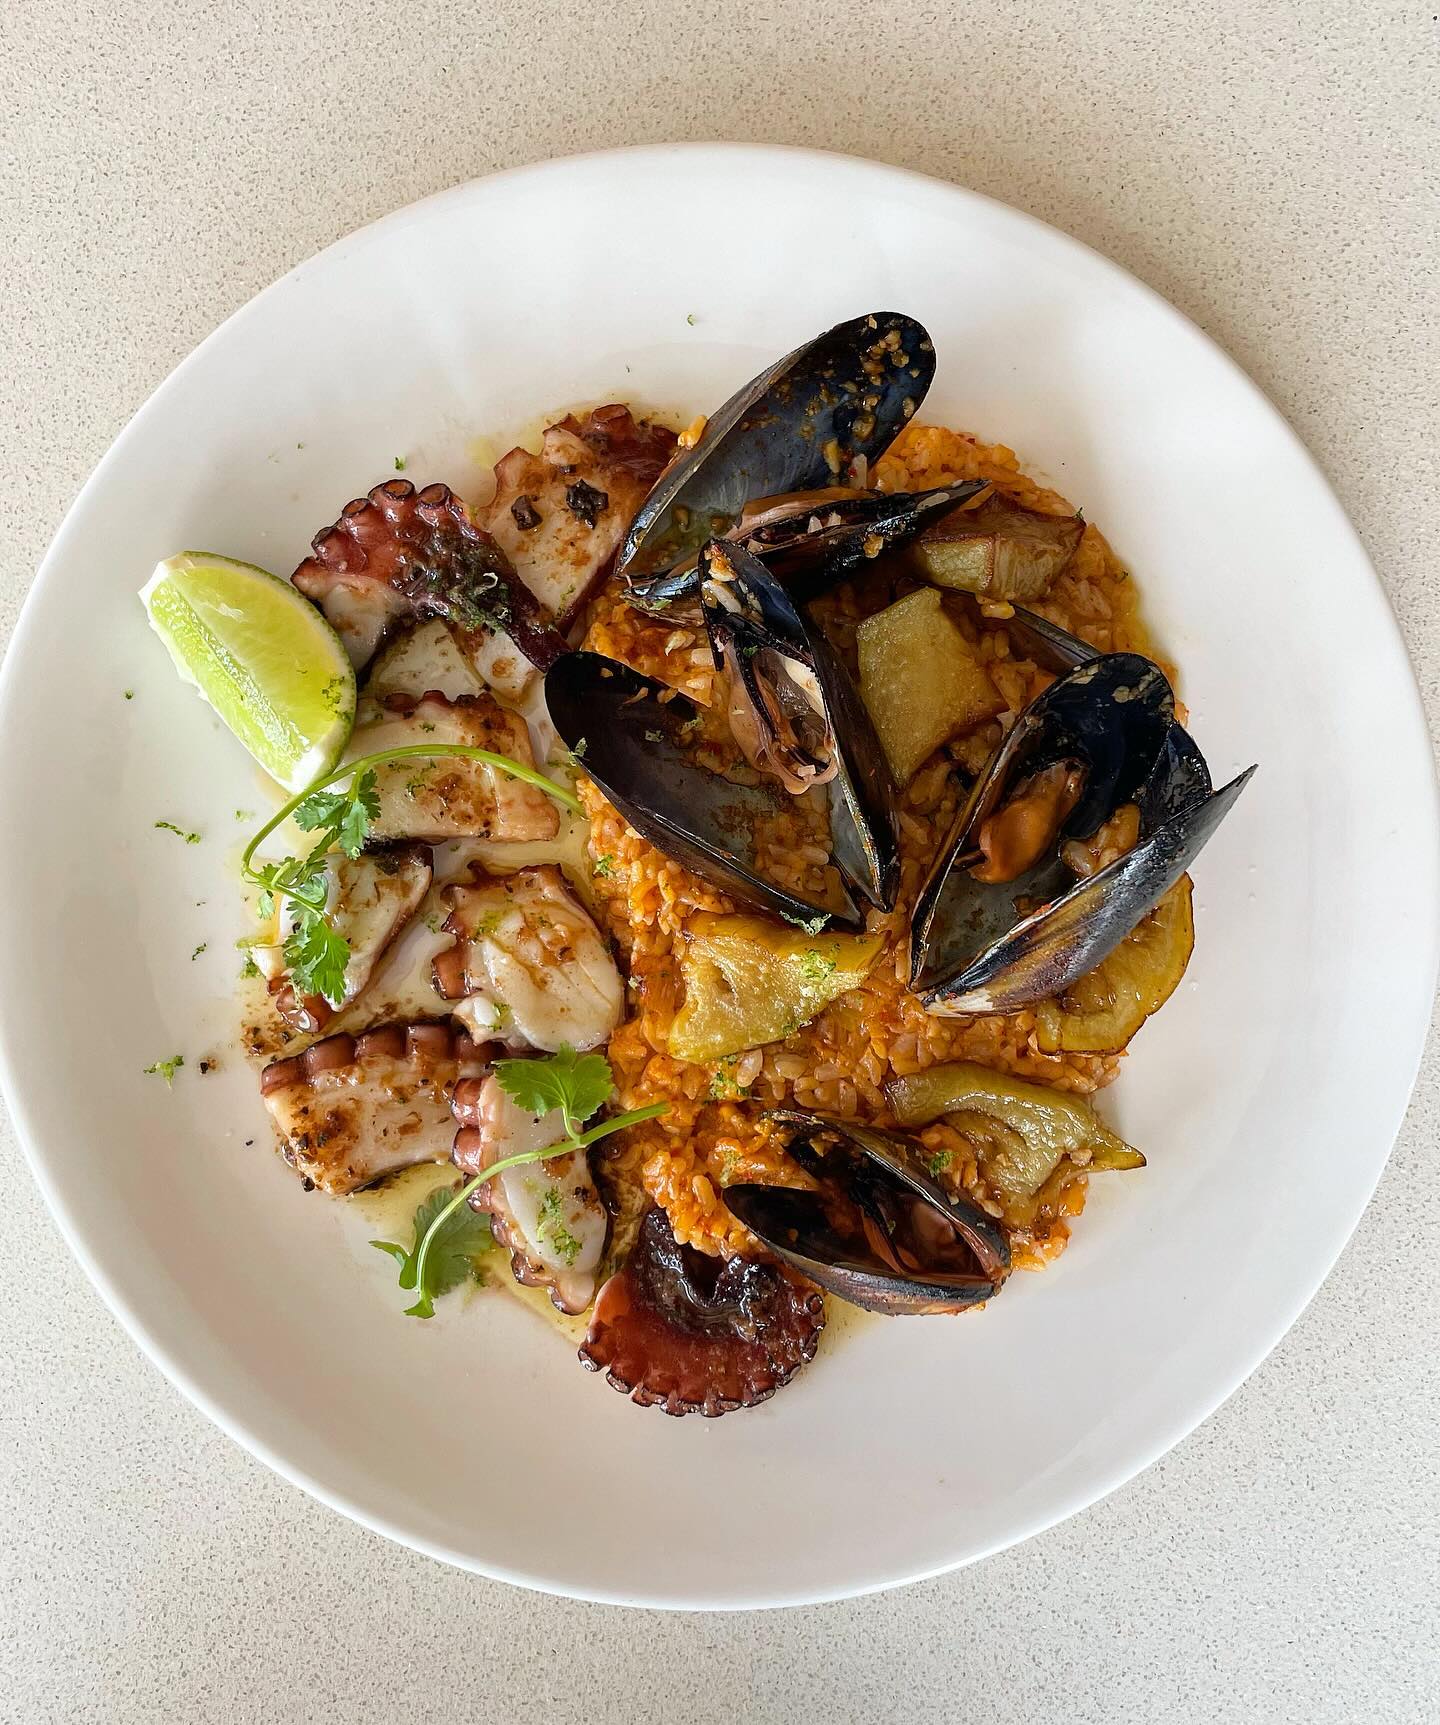 Chef’s next fish specials is WA octopus with mussel and eggplant risotto.